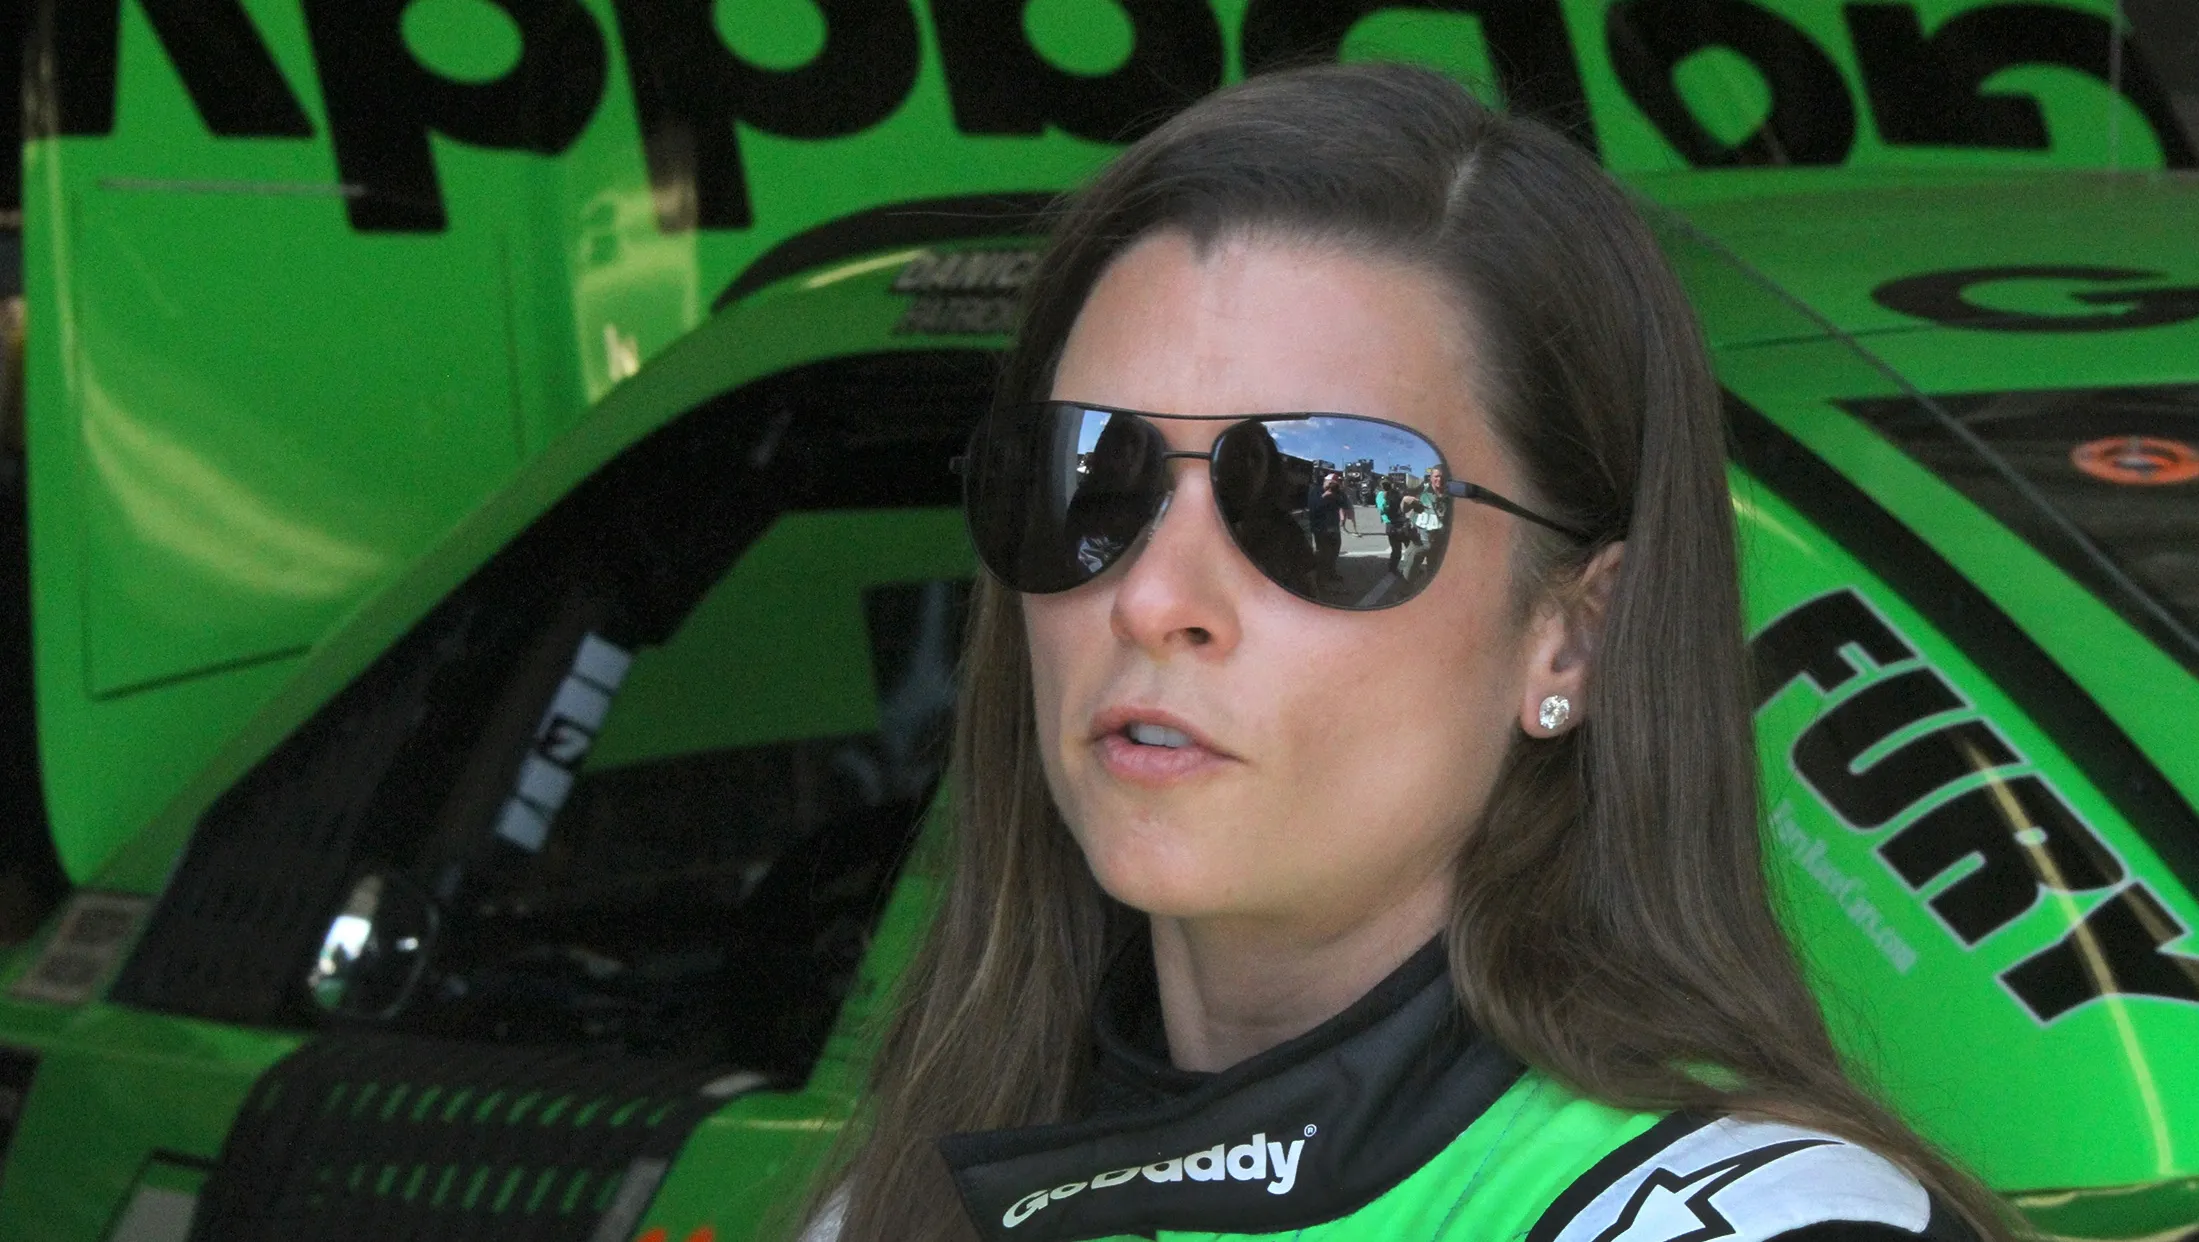 Which race track did Danica Patrick win her first pole position in the NASCAR Cup Series?